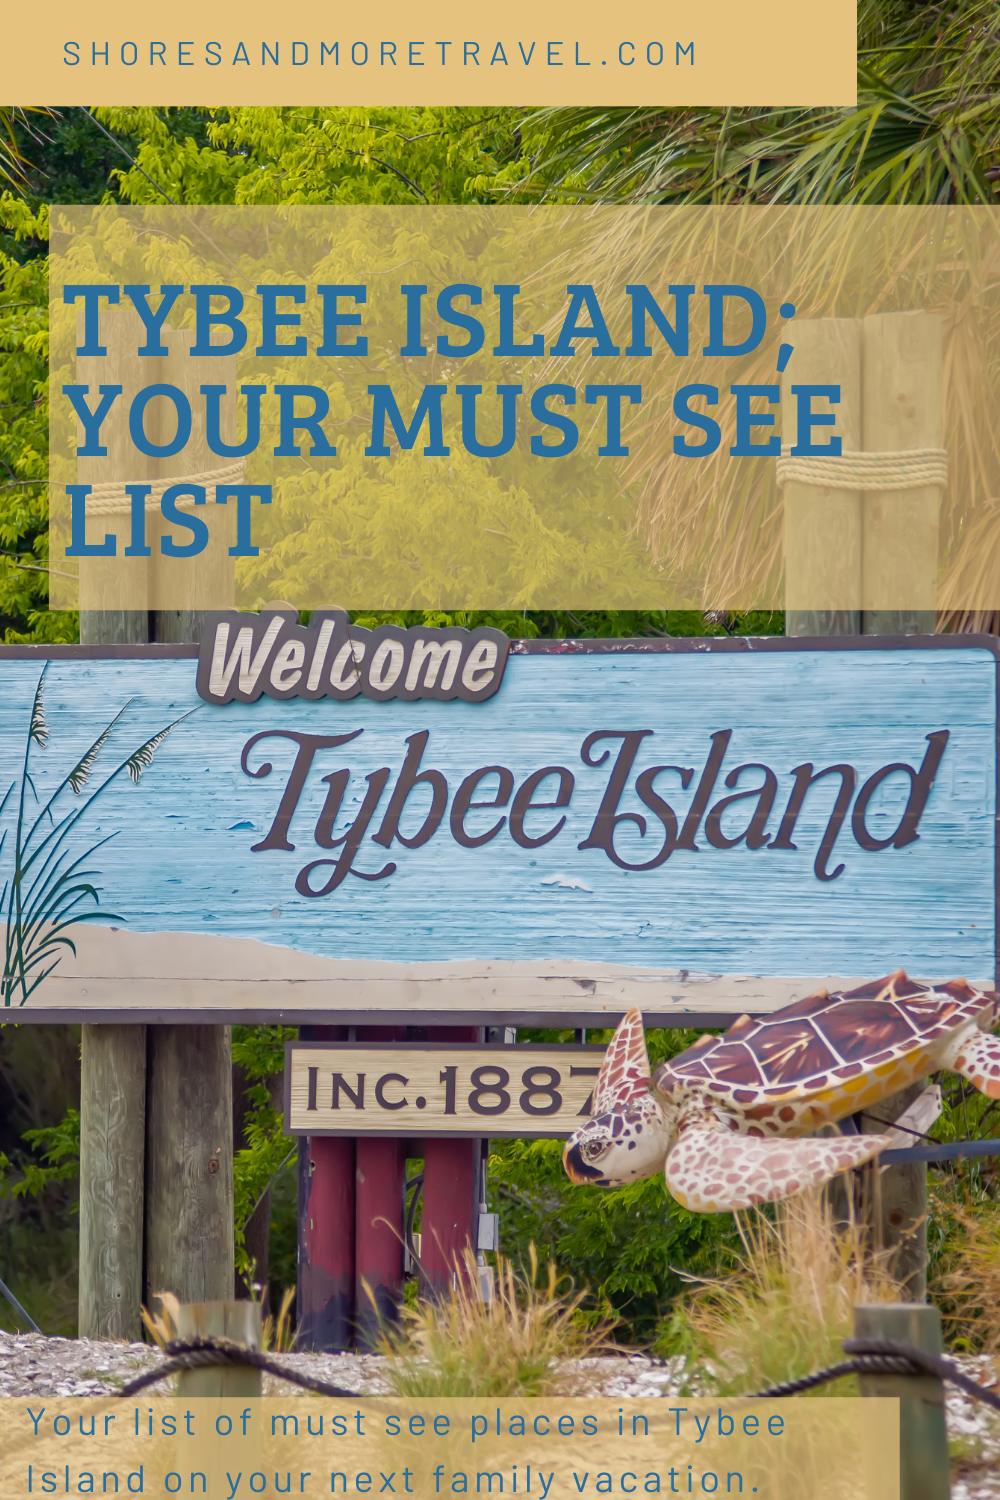 Tybee Island: Your Must See List